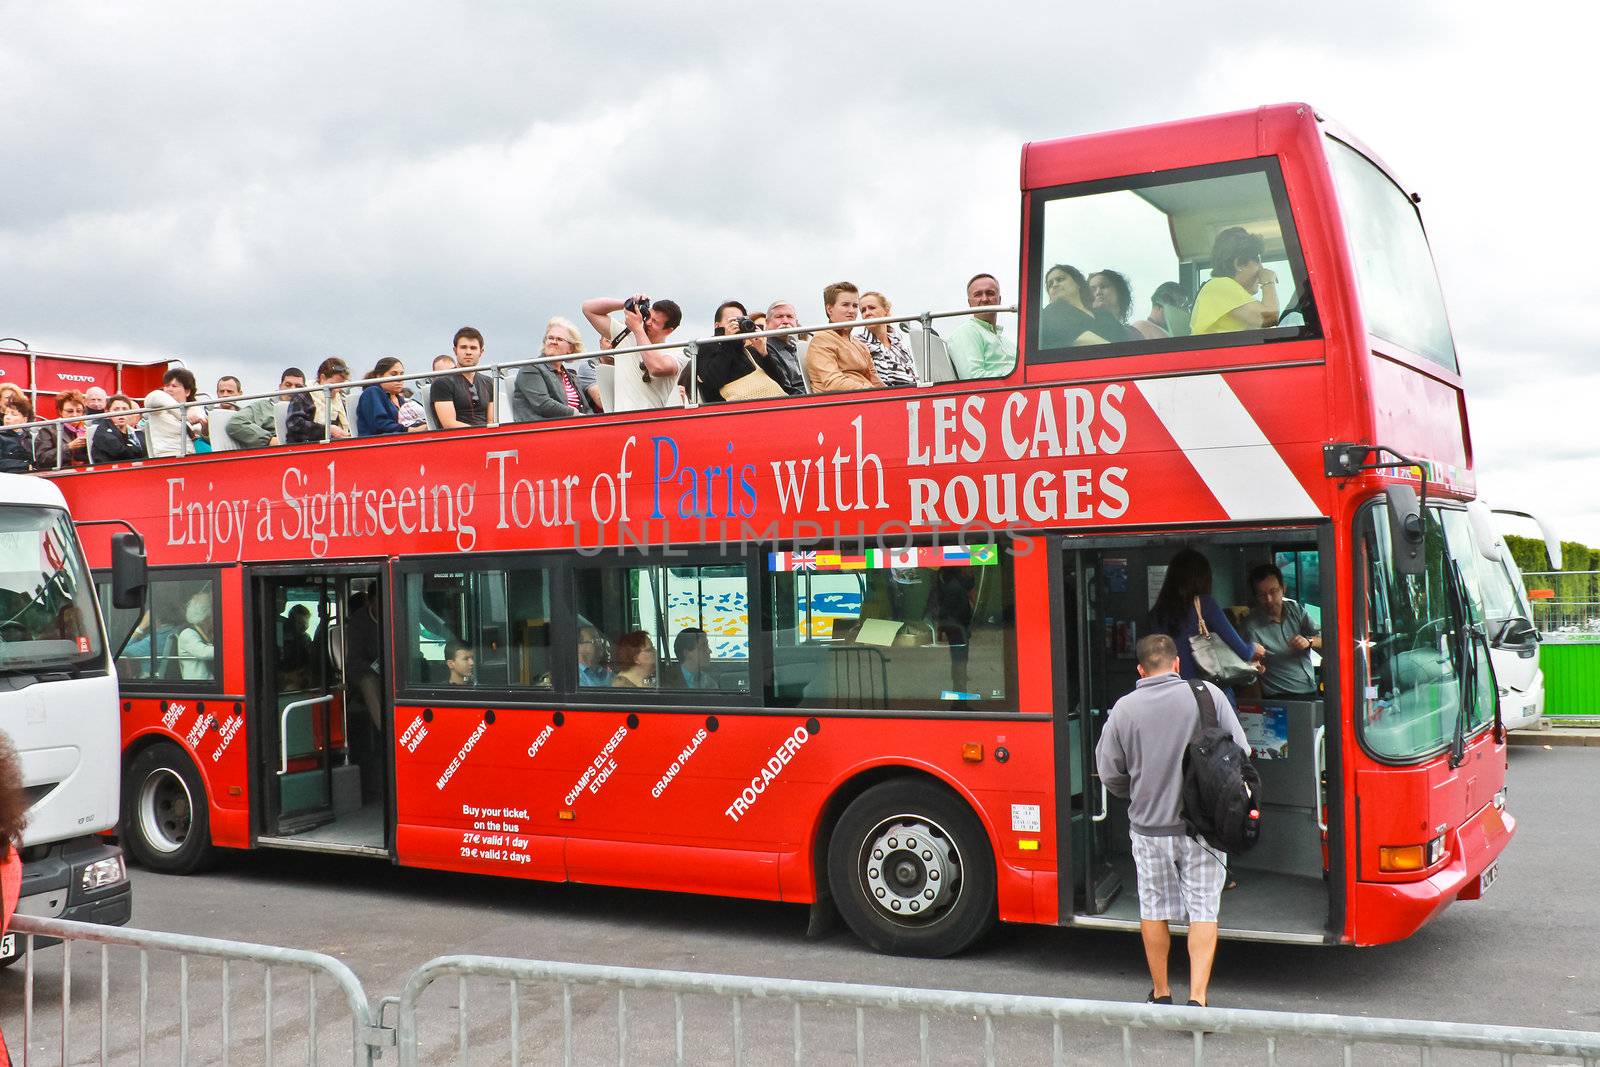 PARIS, FRANCE - JULY 10:Tourists bus in the heart of Paris on July 10, 2012. Paris is one of the most visited cities in the world.